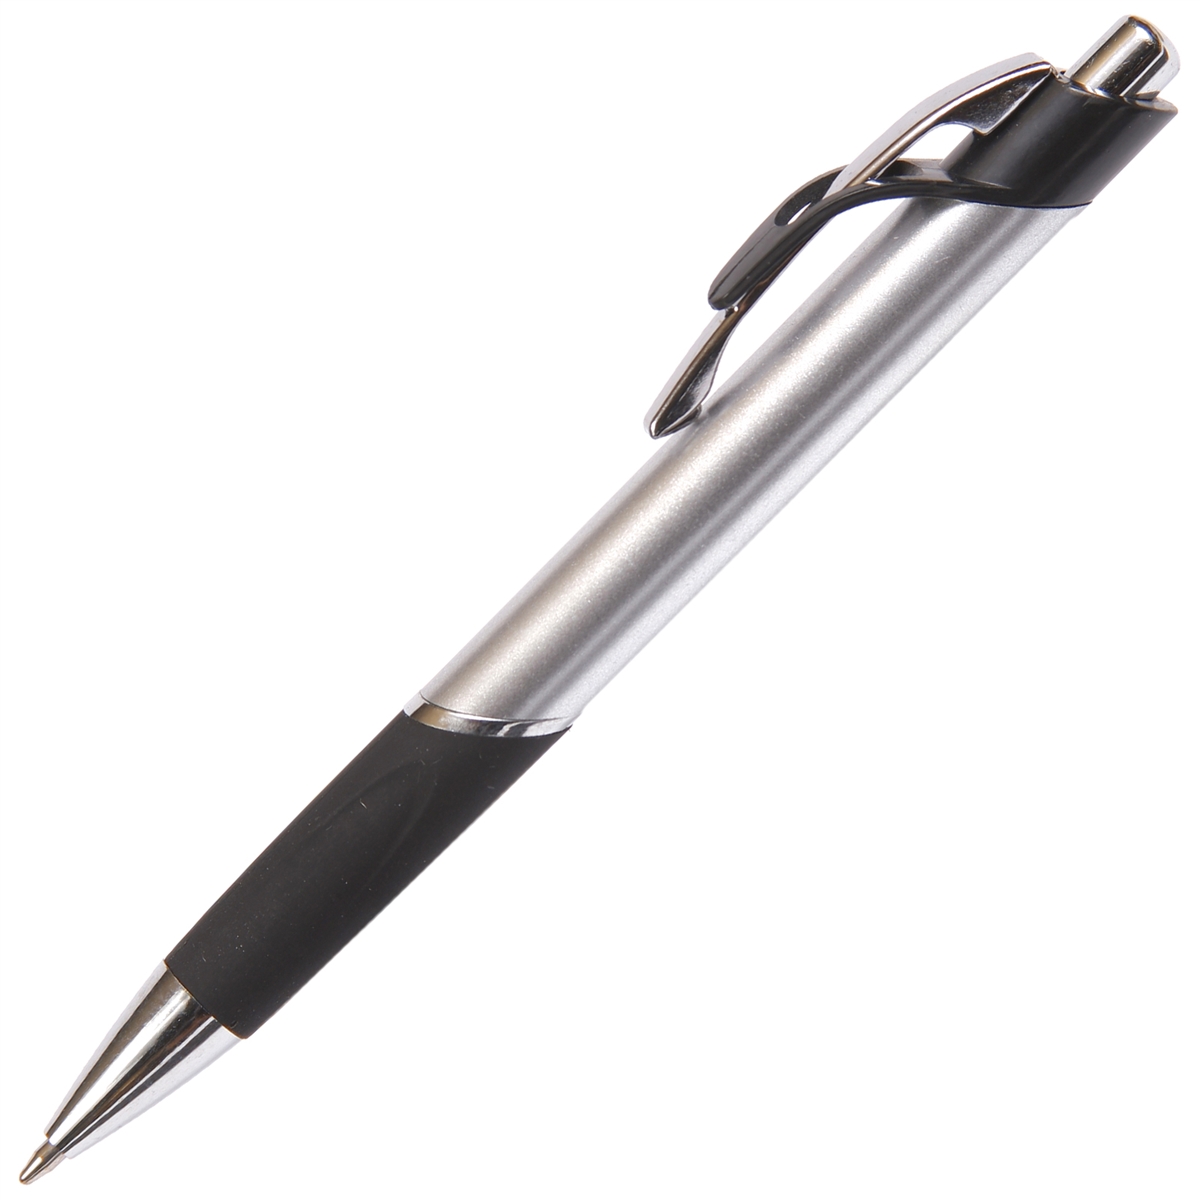 I100 - Silver & Black Ball Point by Lanier Pens